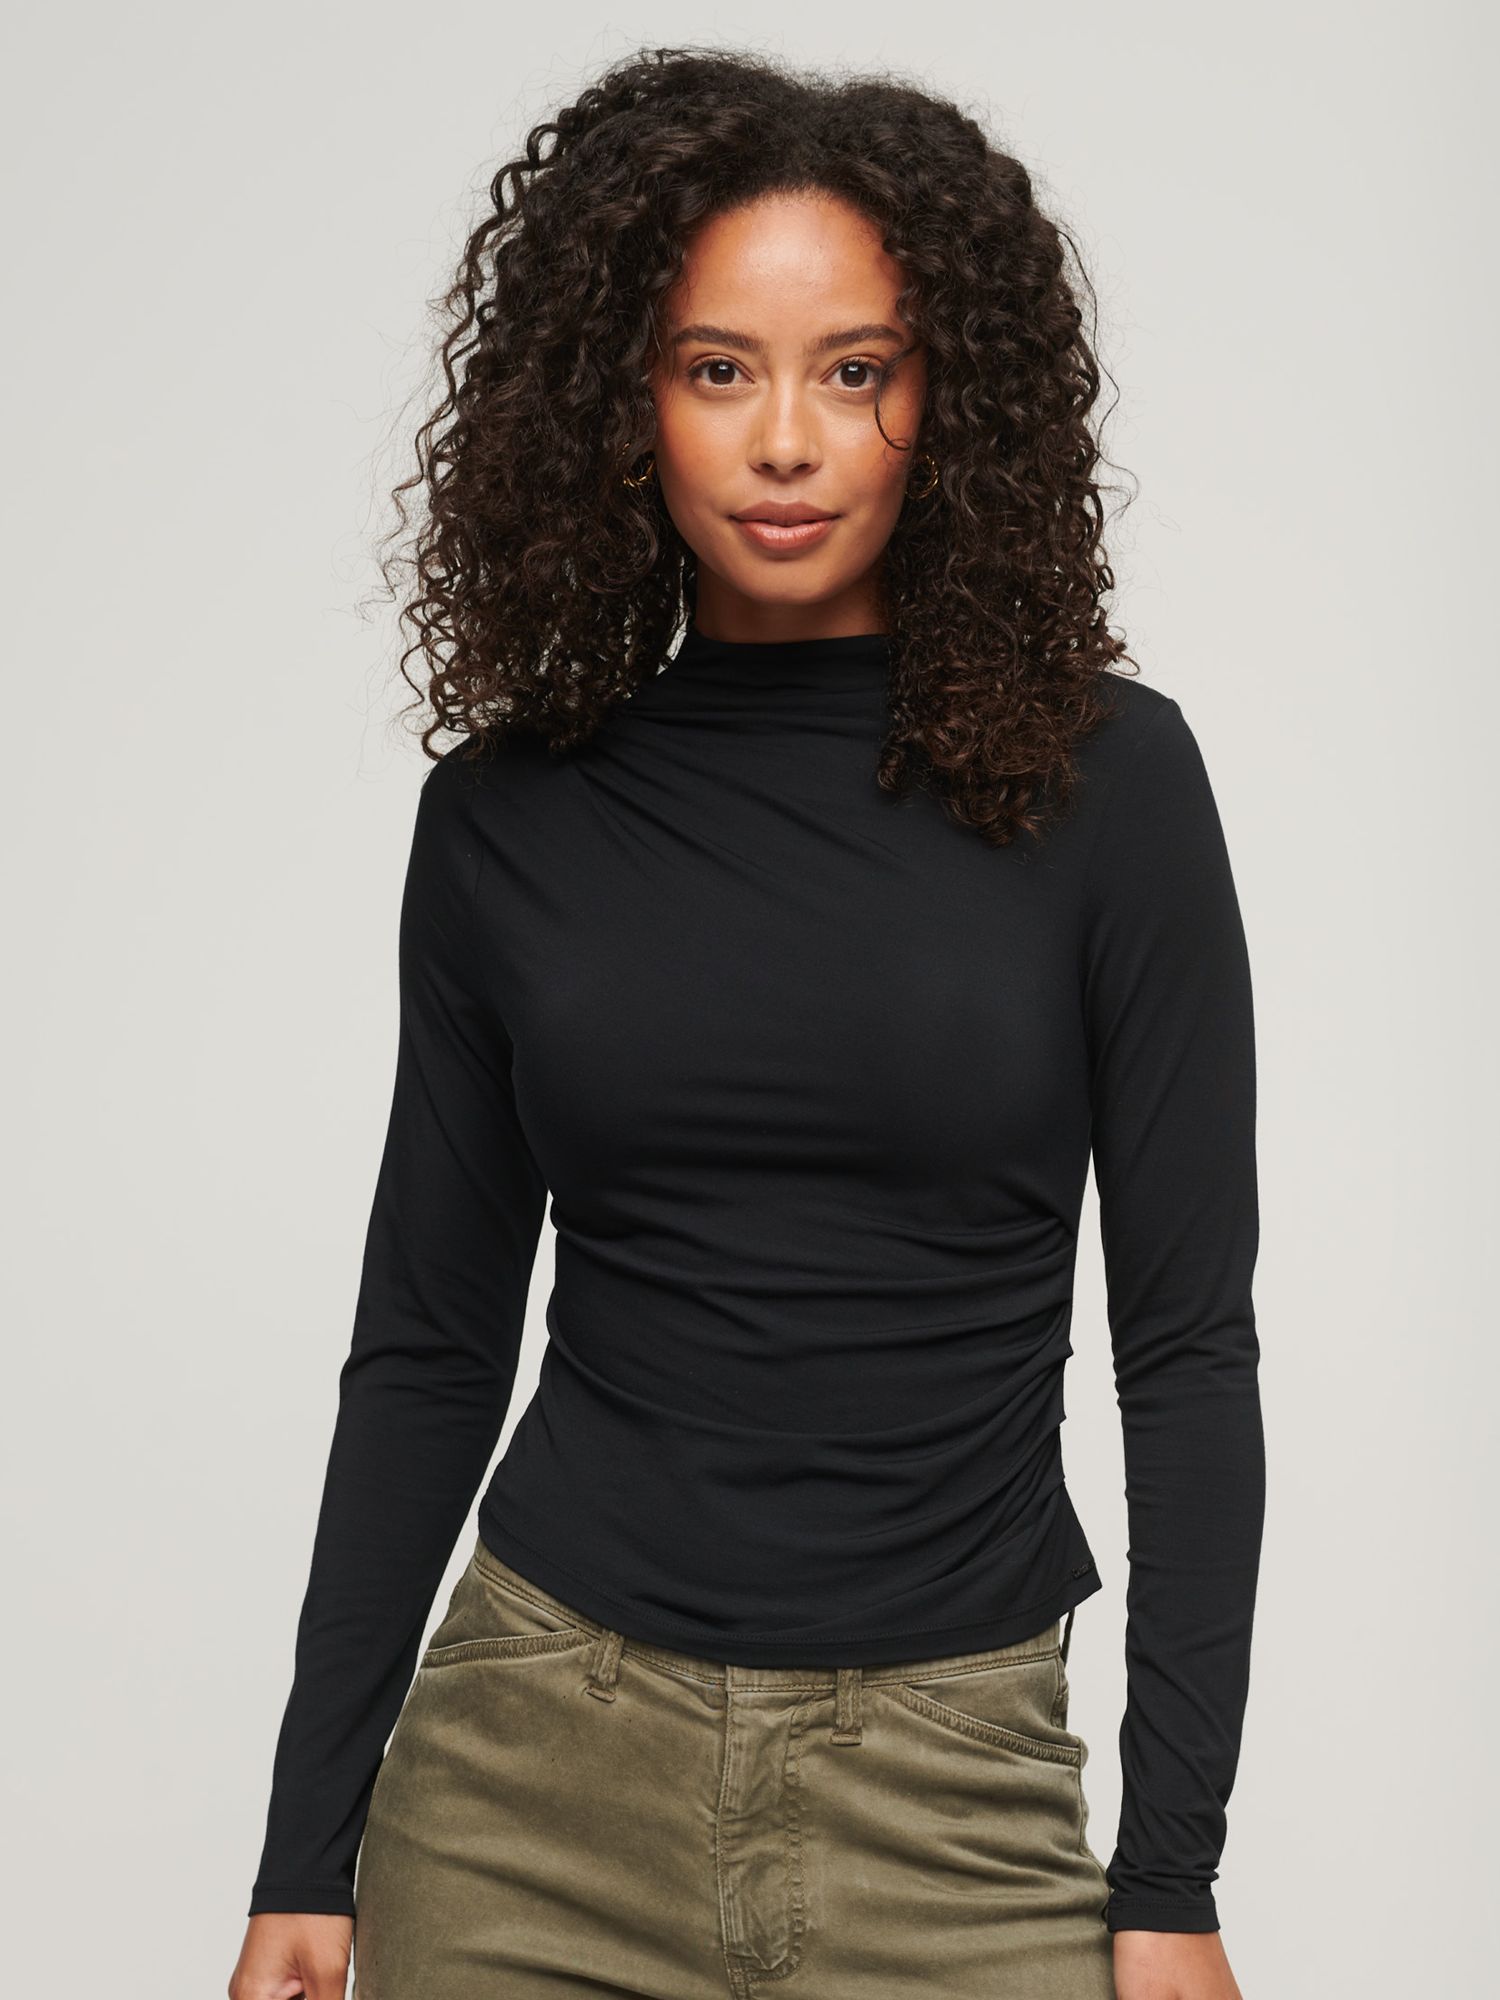 Women's Long Sleeve Ruched Mock Neck Top in Brown Chicory Coffee